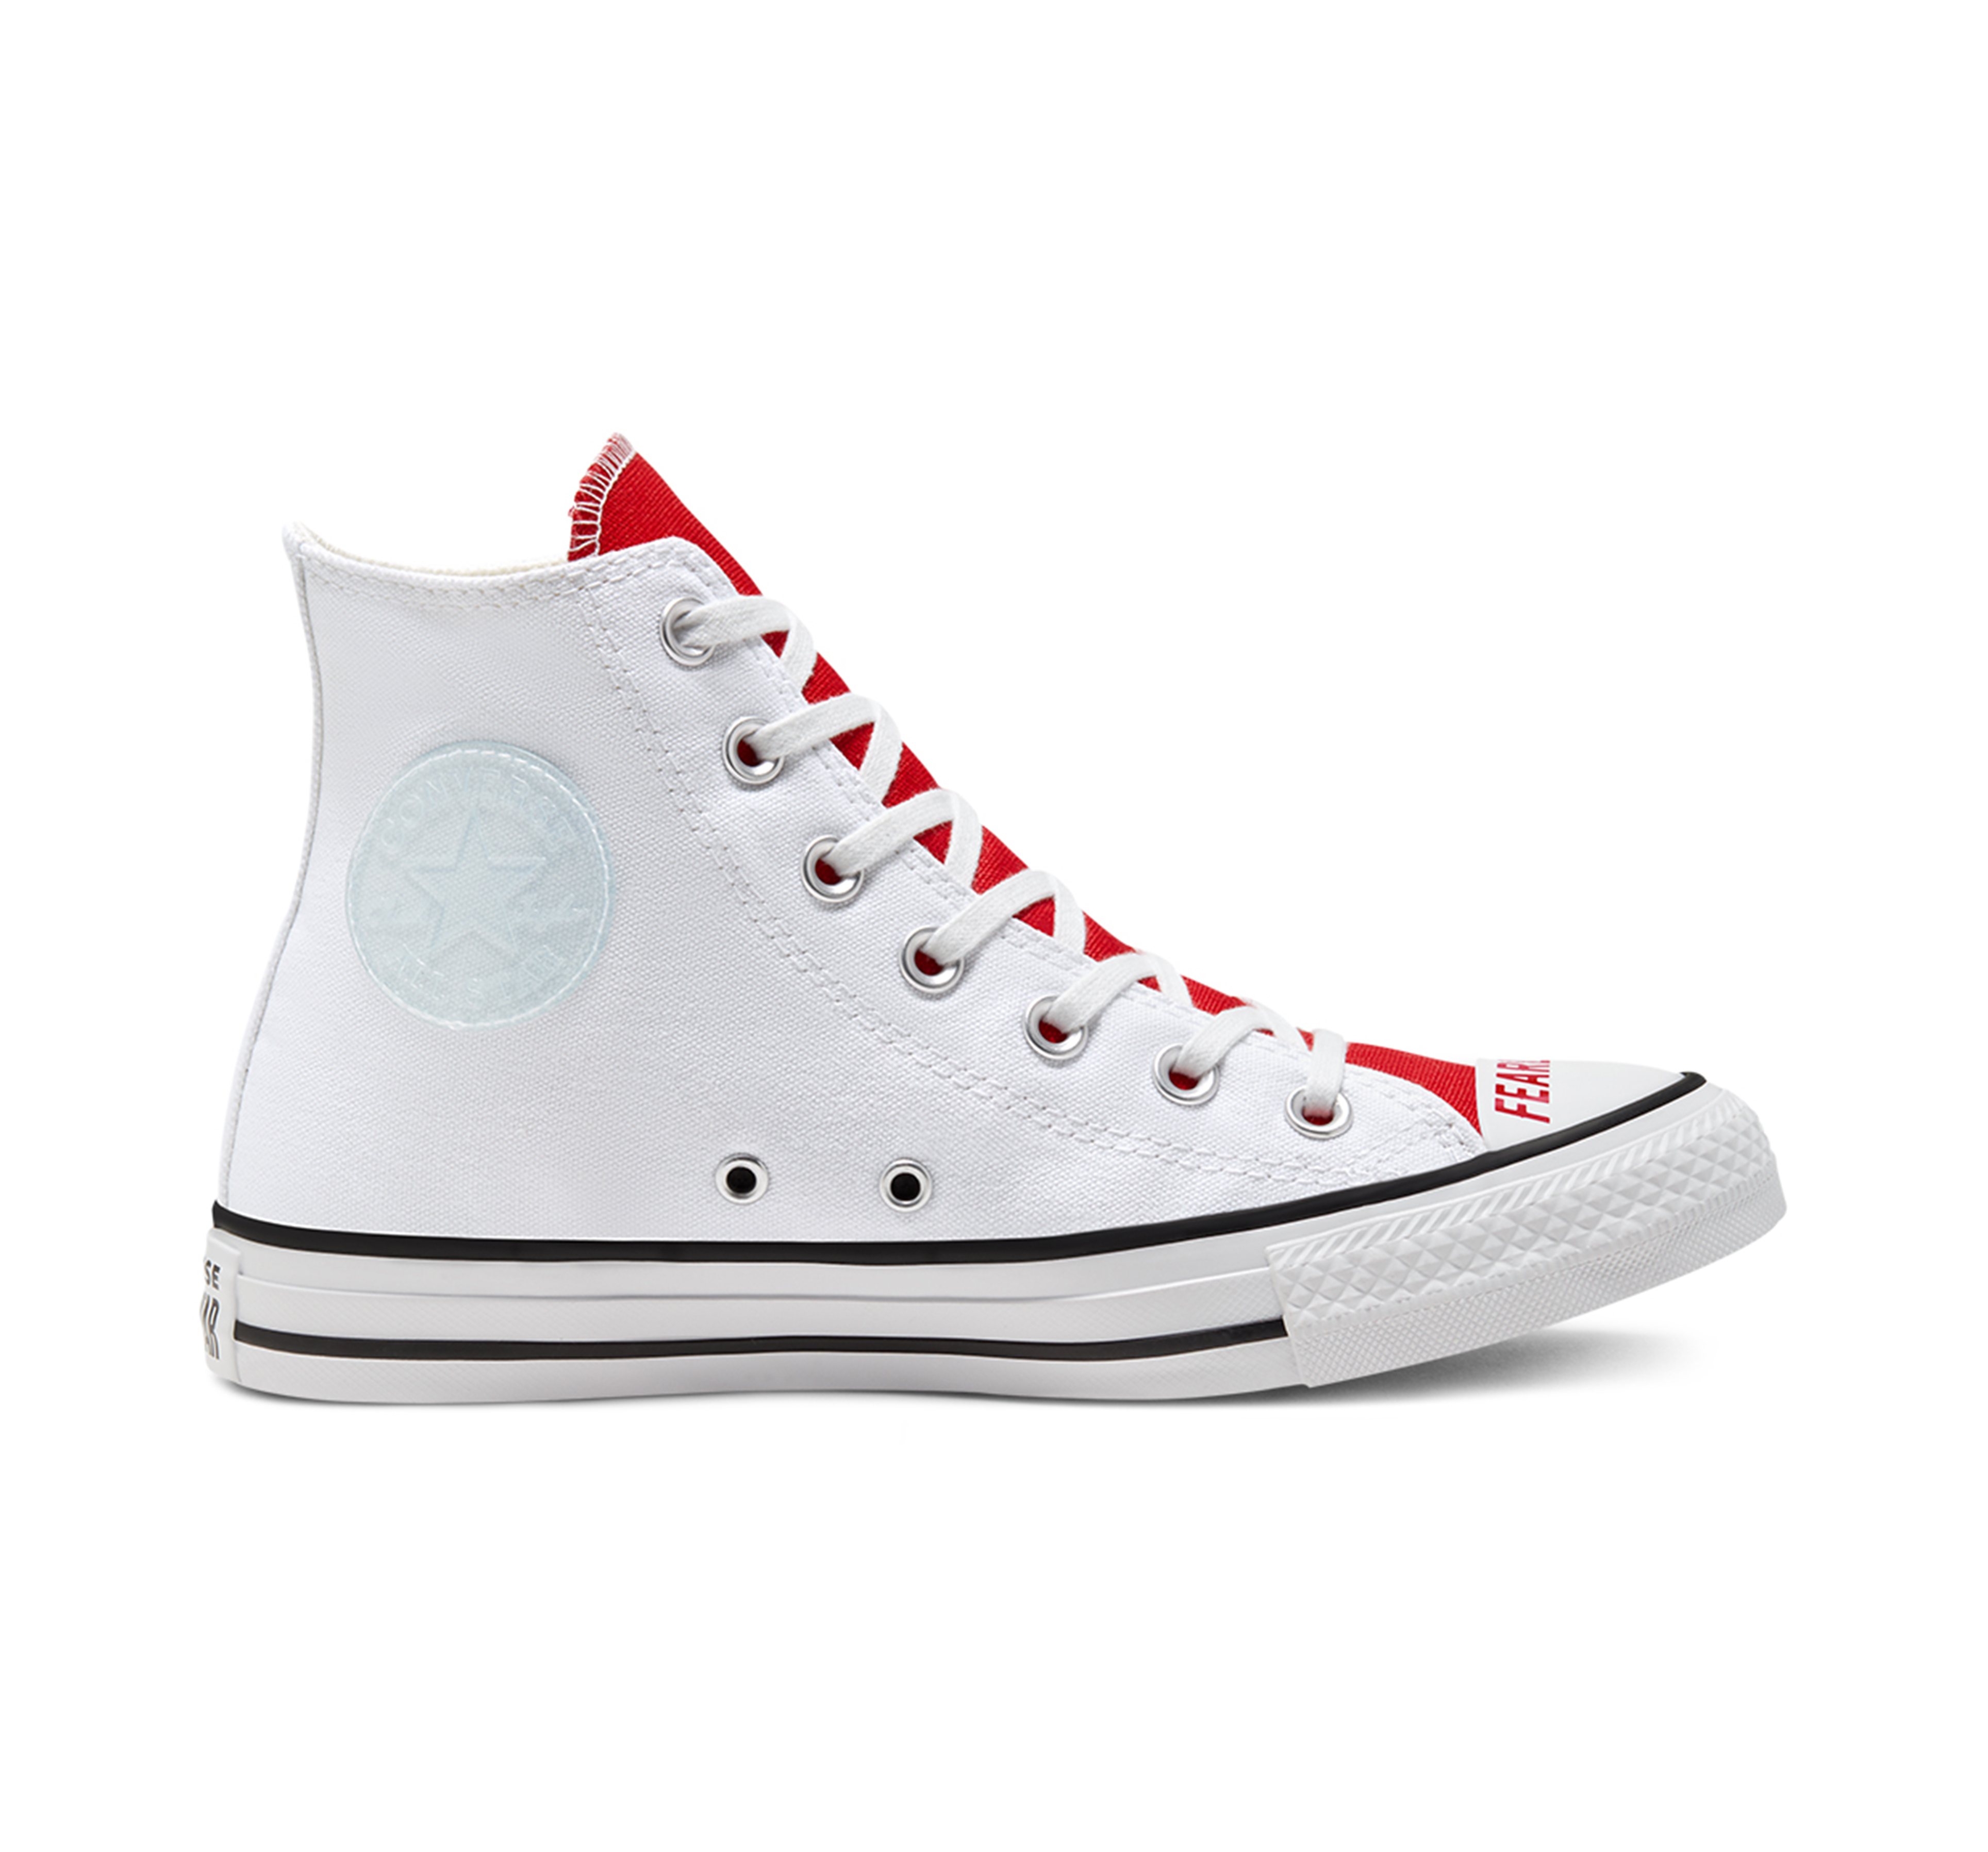 chuck taylor all star converse on sale